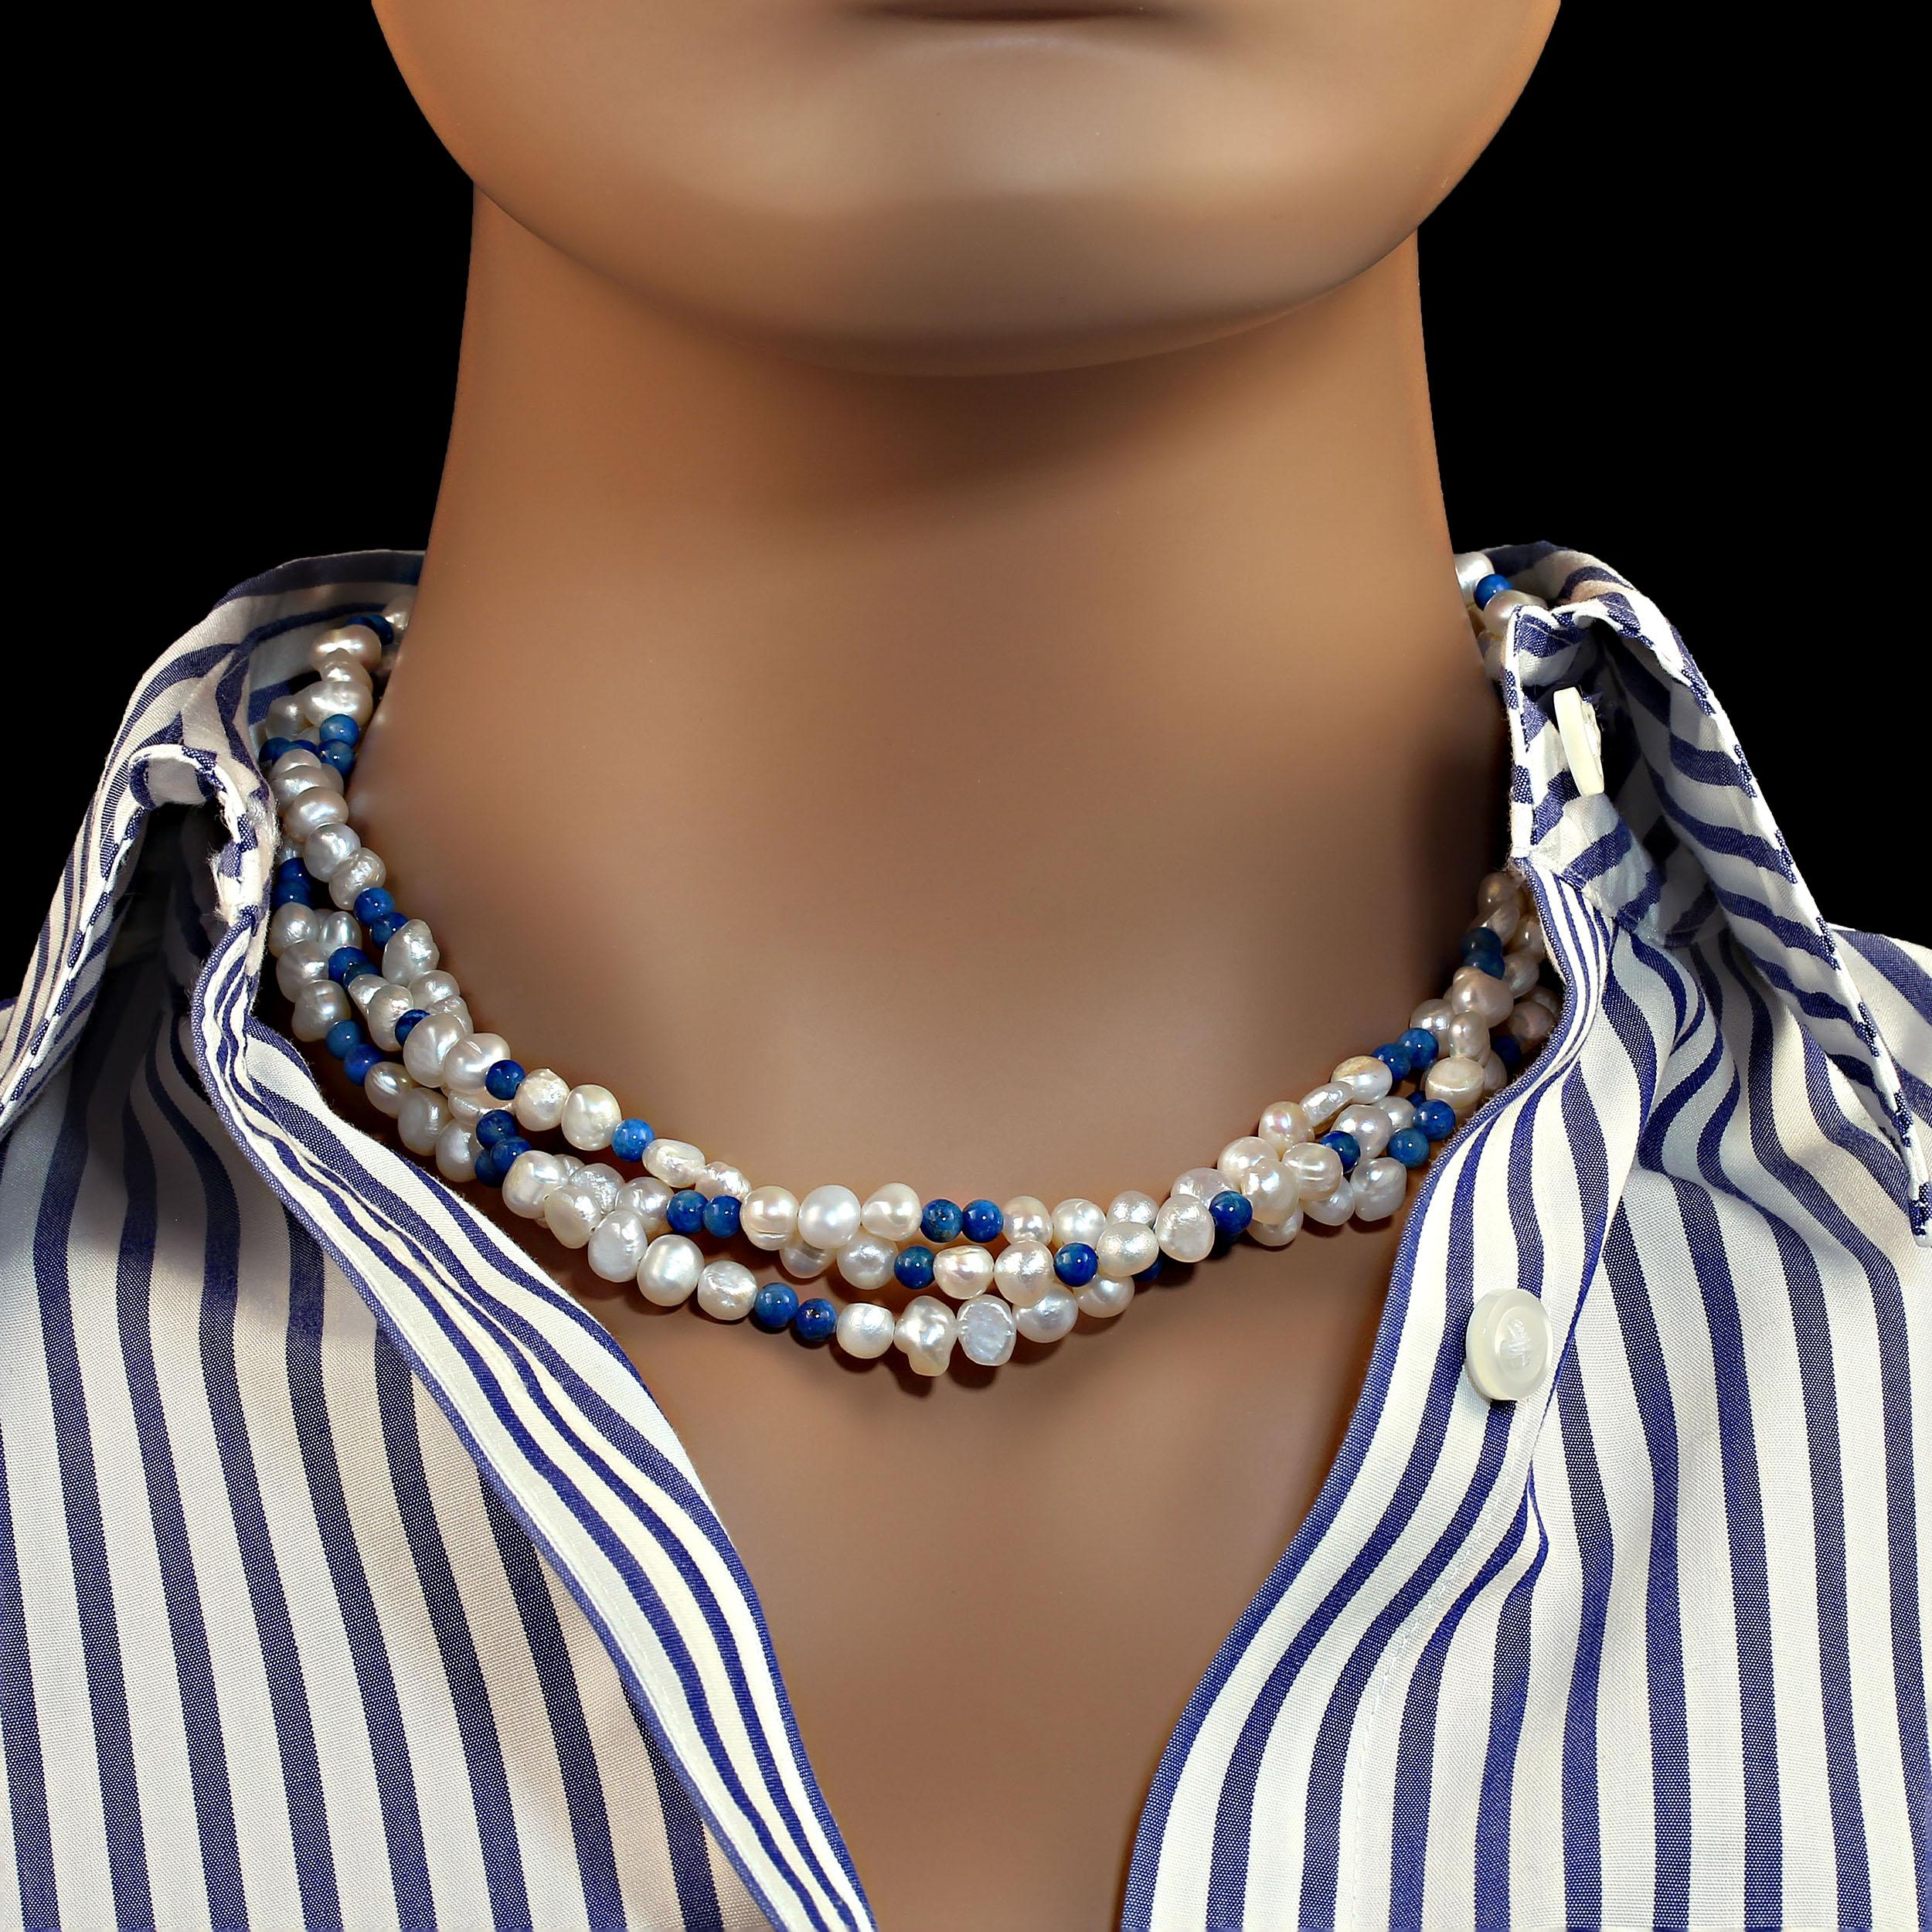 Because you deserve to wear Pearls
Unique necklace of three strands of glowing iridescent White Pearls and highly polished 4 MM blue Lapis Lazuli. The pearls and lapis lazuli are arranged differently in each of the three strands which are loosely